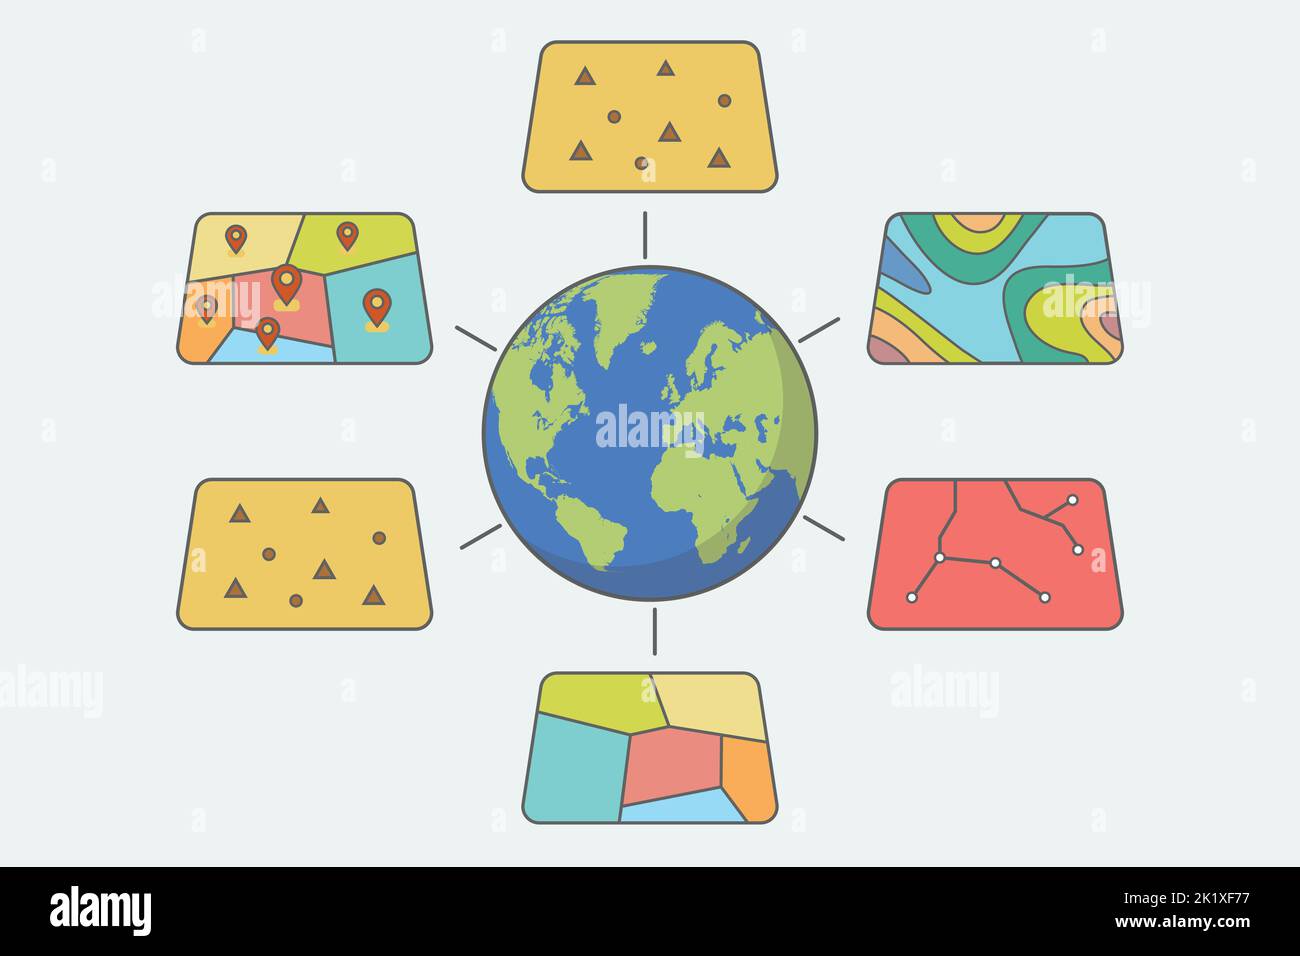 GIS Spatial Data Layers Concept for Business Analysis. Geographic Information System. Vector illustration. Stock Vector